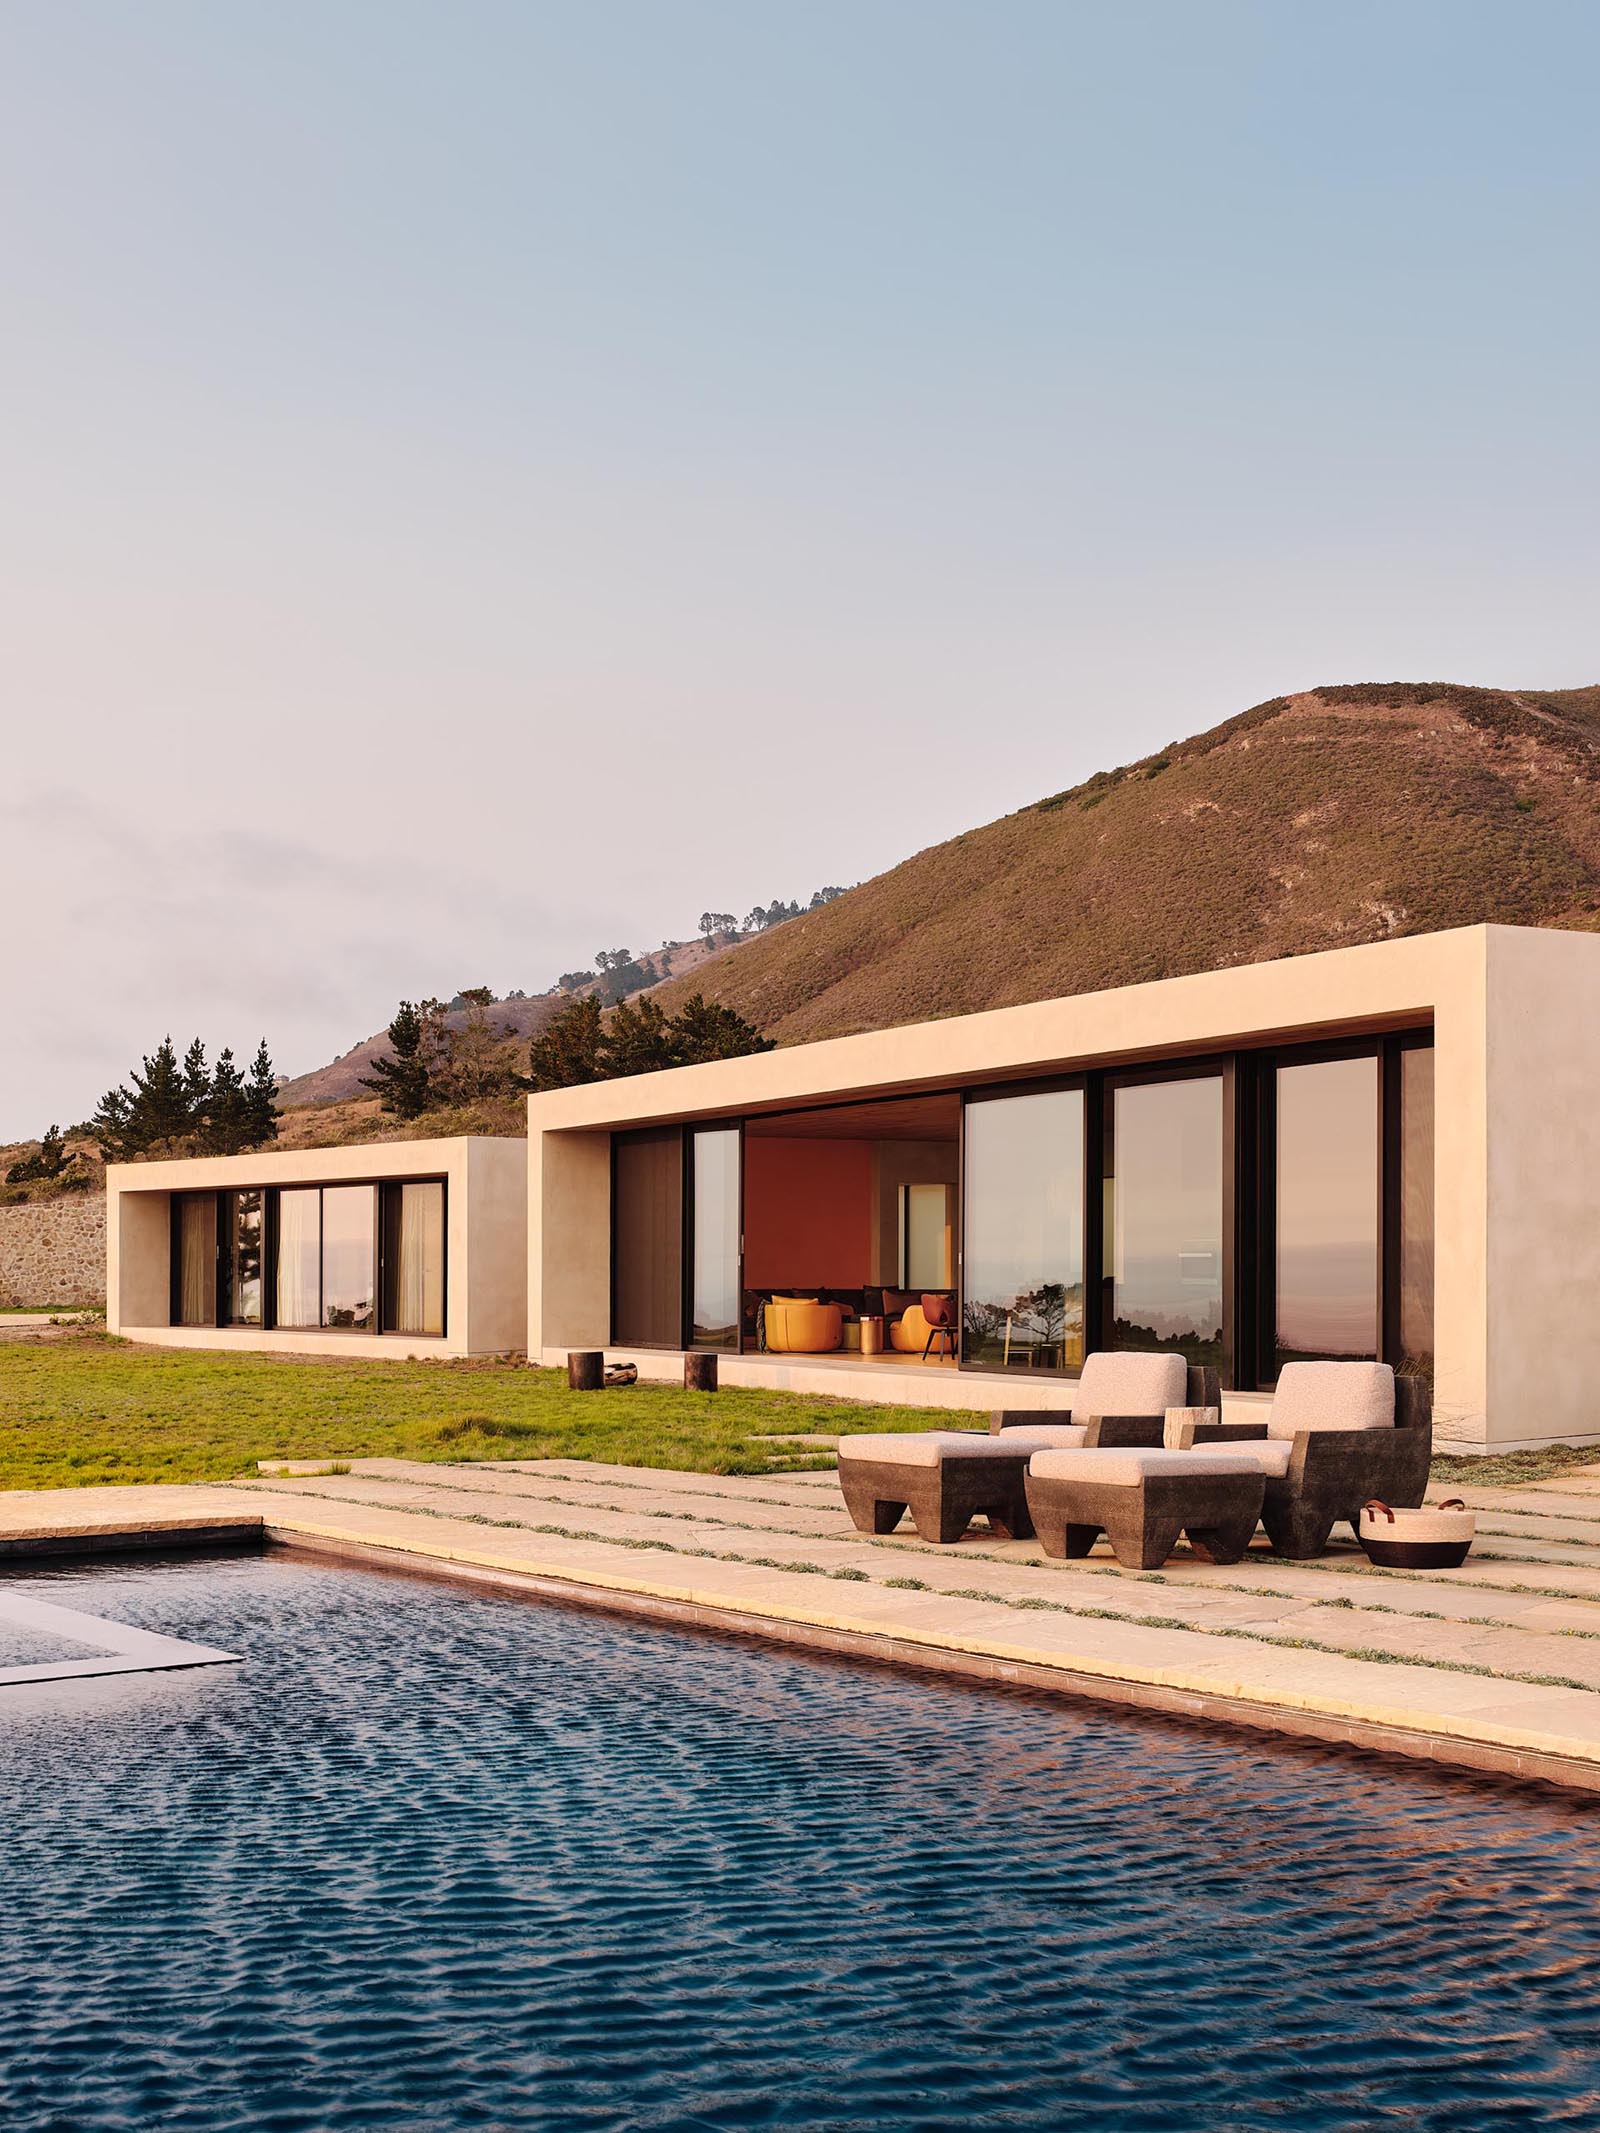 Sliding glass walls line the walls facing the ocean, and connect the interiors of this modern house to the outdoor spaces and the swimming pool.